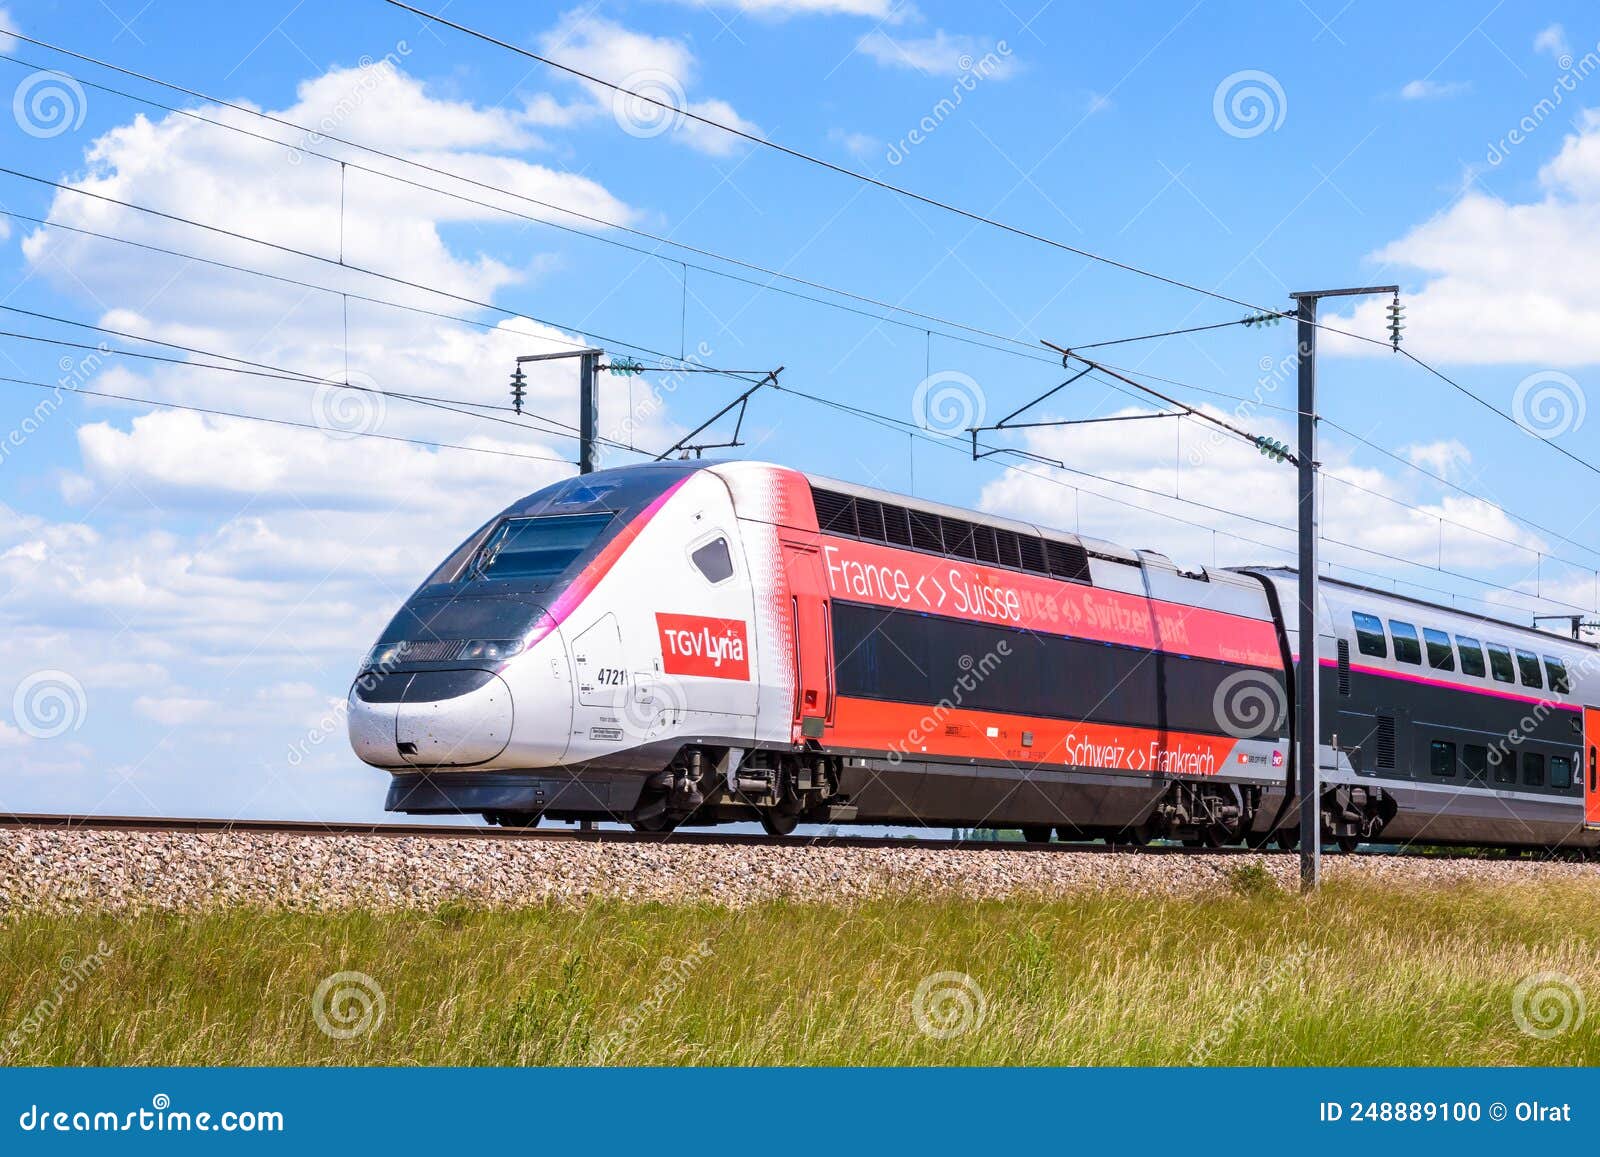 A TGV Lyria High Speed Train in the Countryside Editorial Image - Image